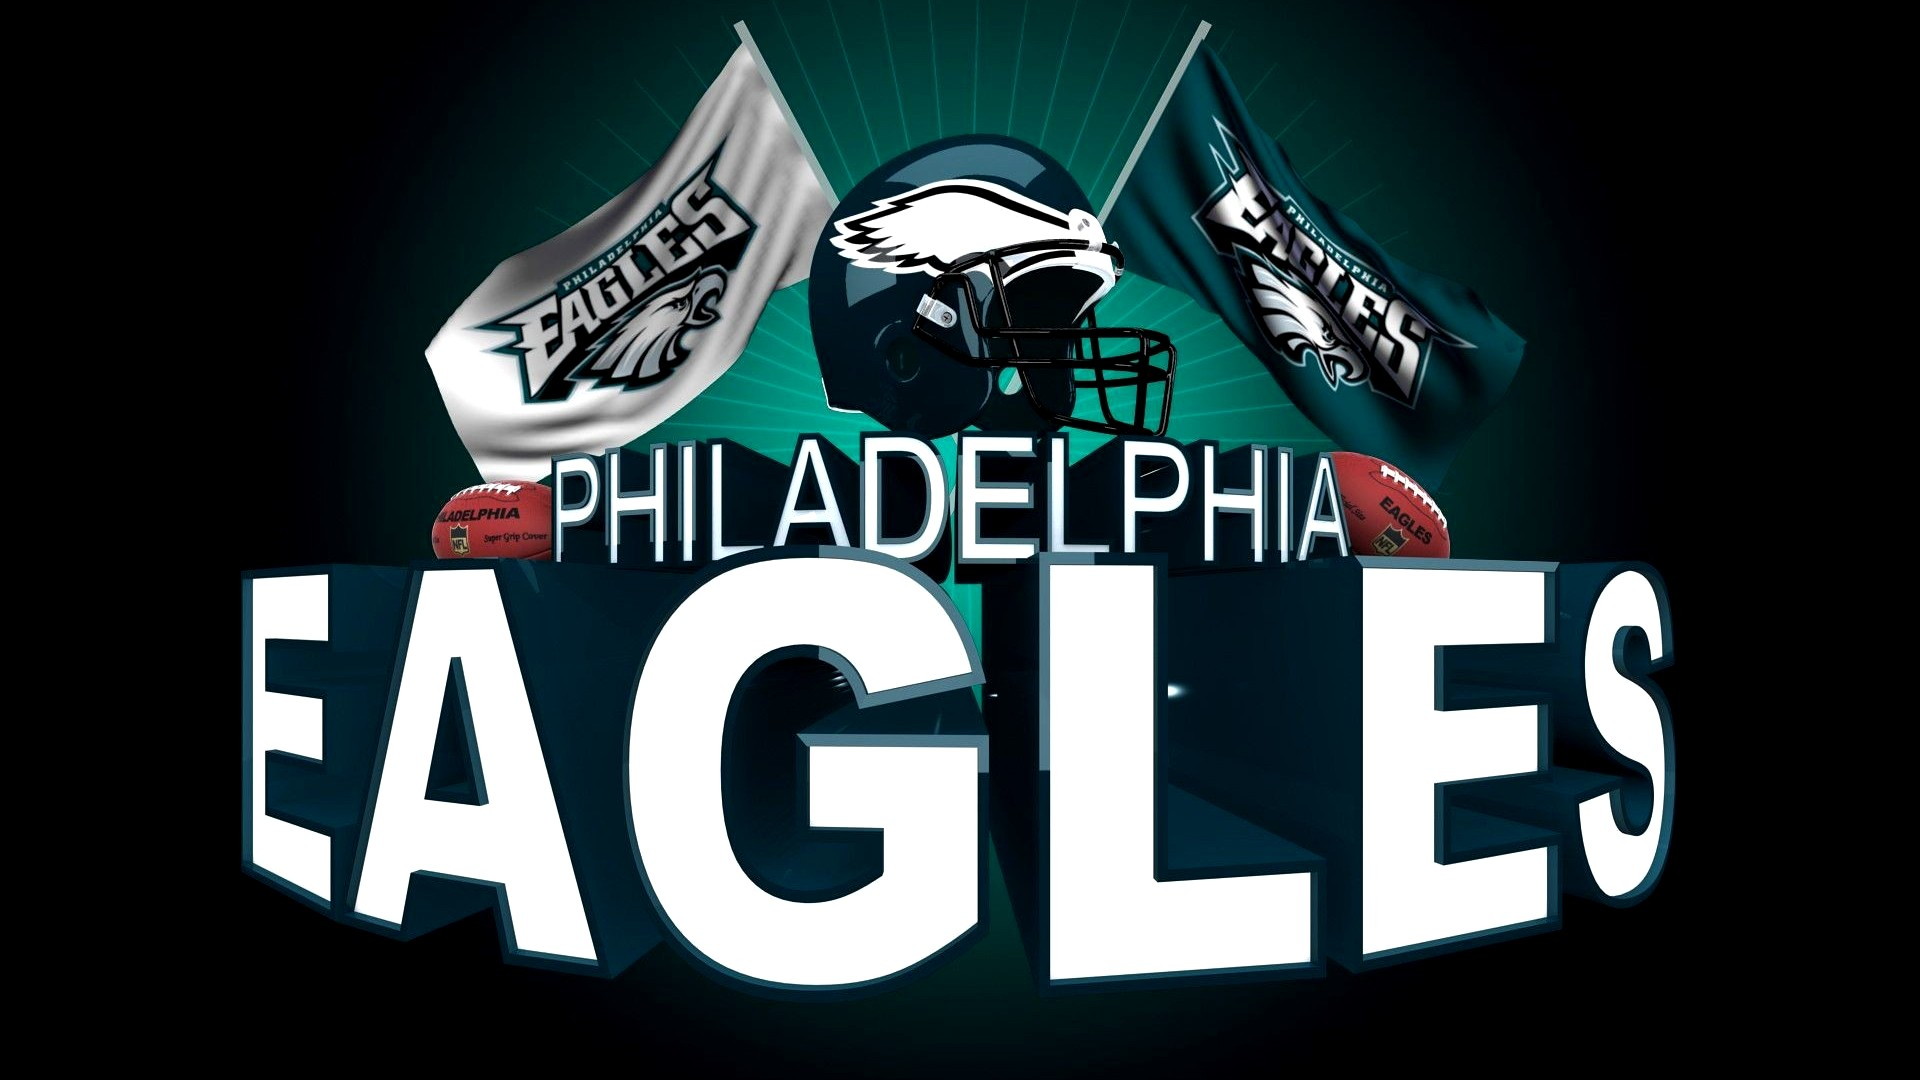 Best Philadelphia Eagles NFL Wallpaper in HD with high-resolution 1920x1080 pixel. You can use and set as wallpaper for Notebook Screensavers, Mac Wallpapers, Mobile Home Screen, iPhone or Android Phones Lock Screen